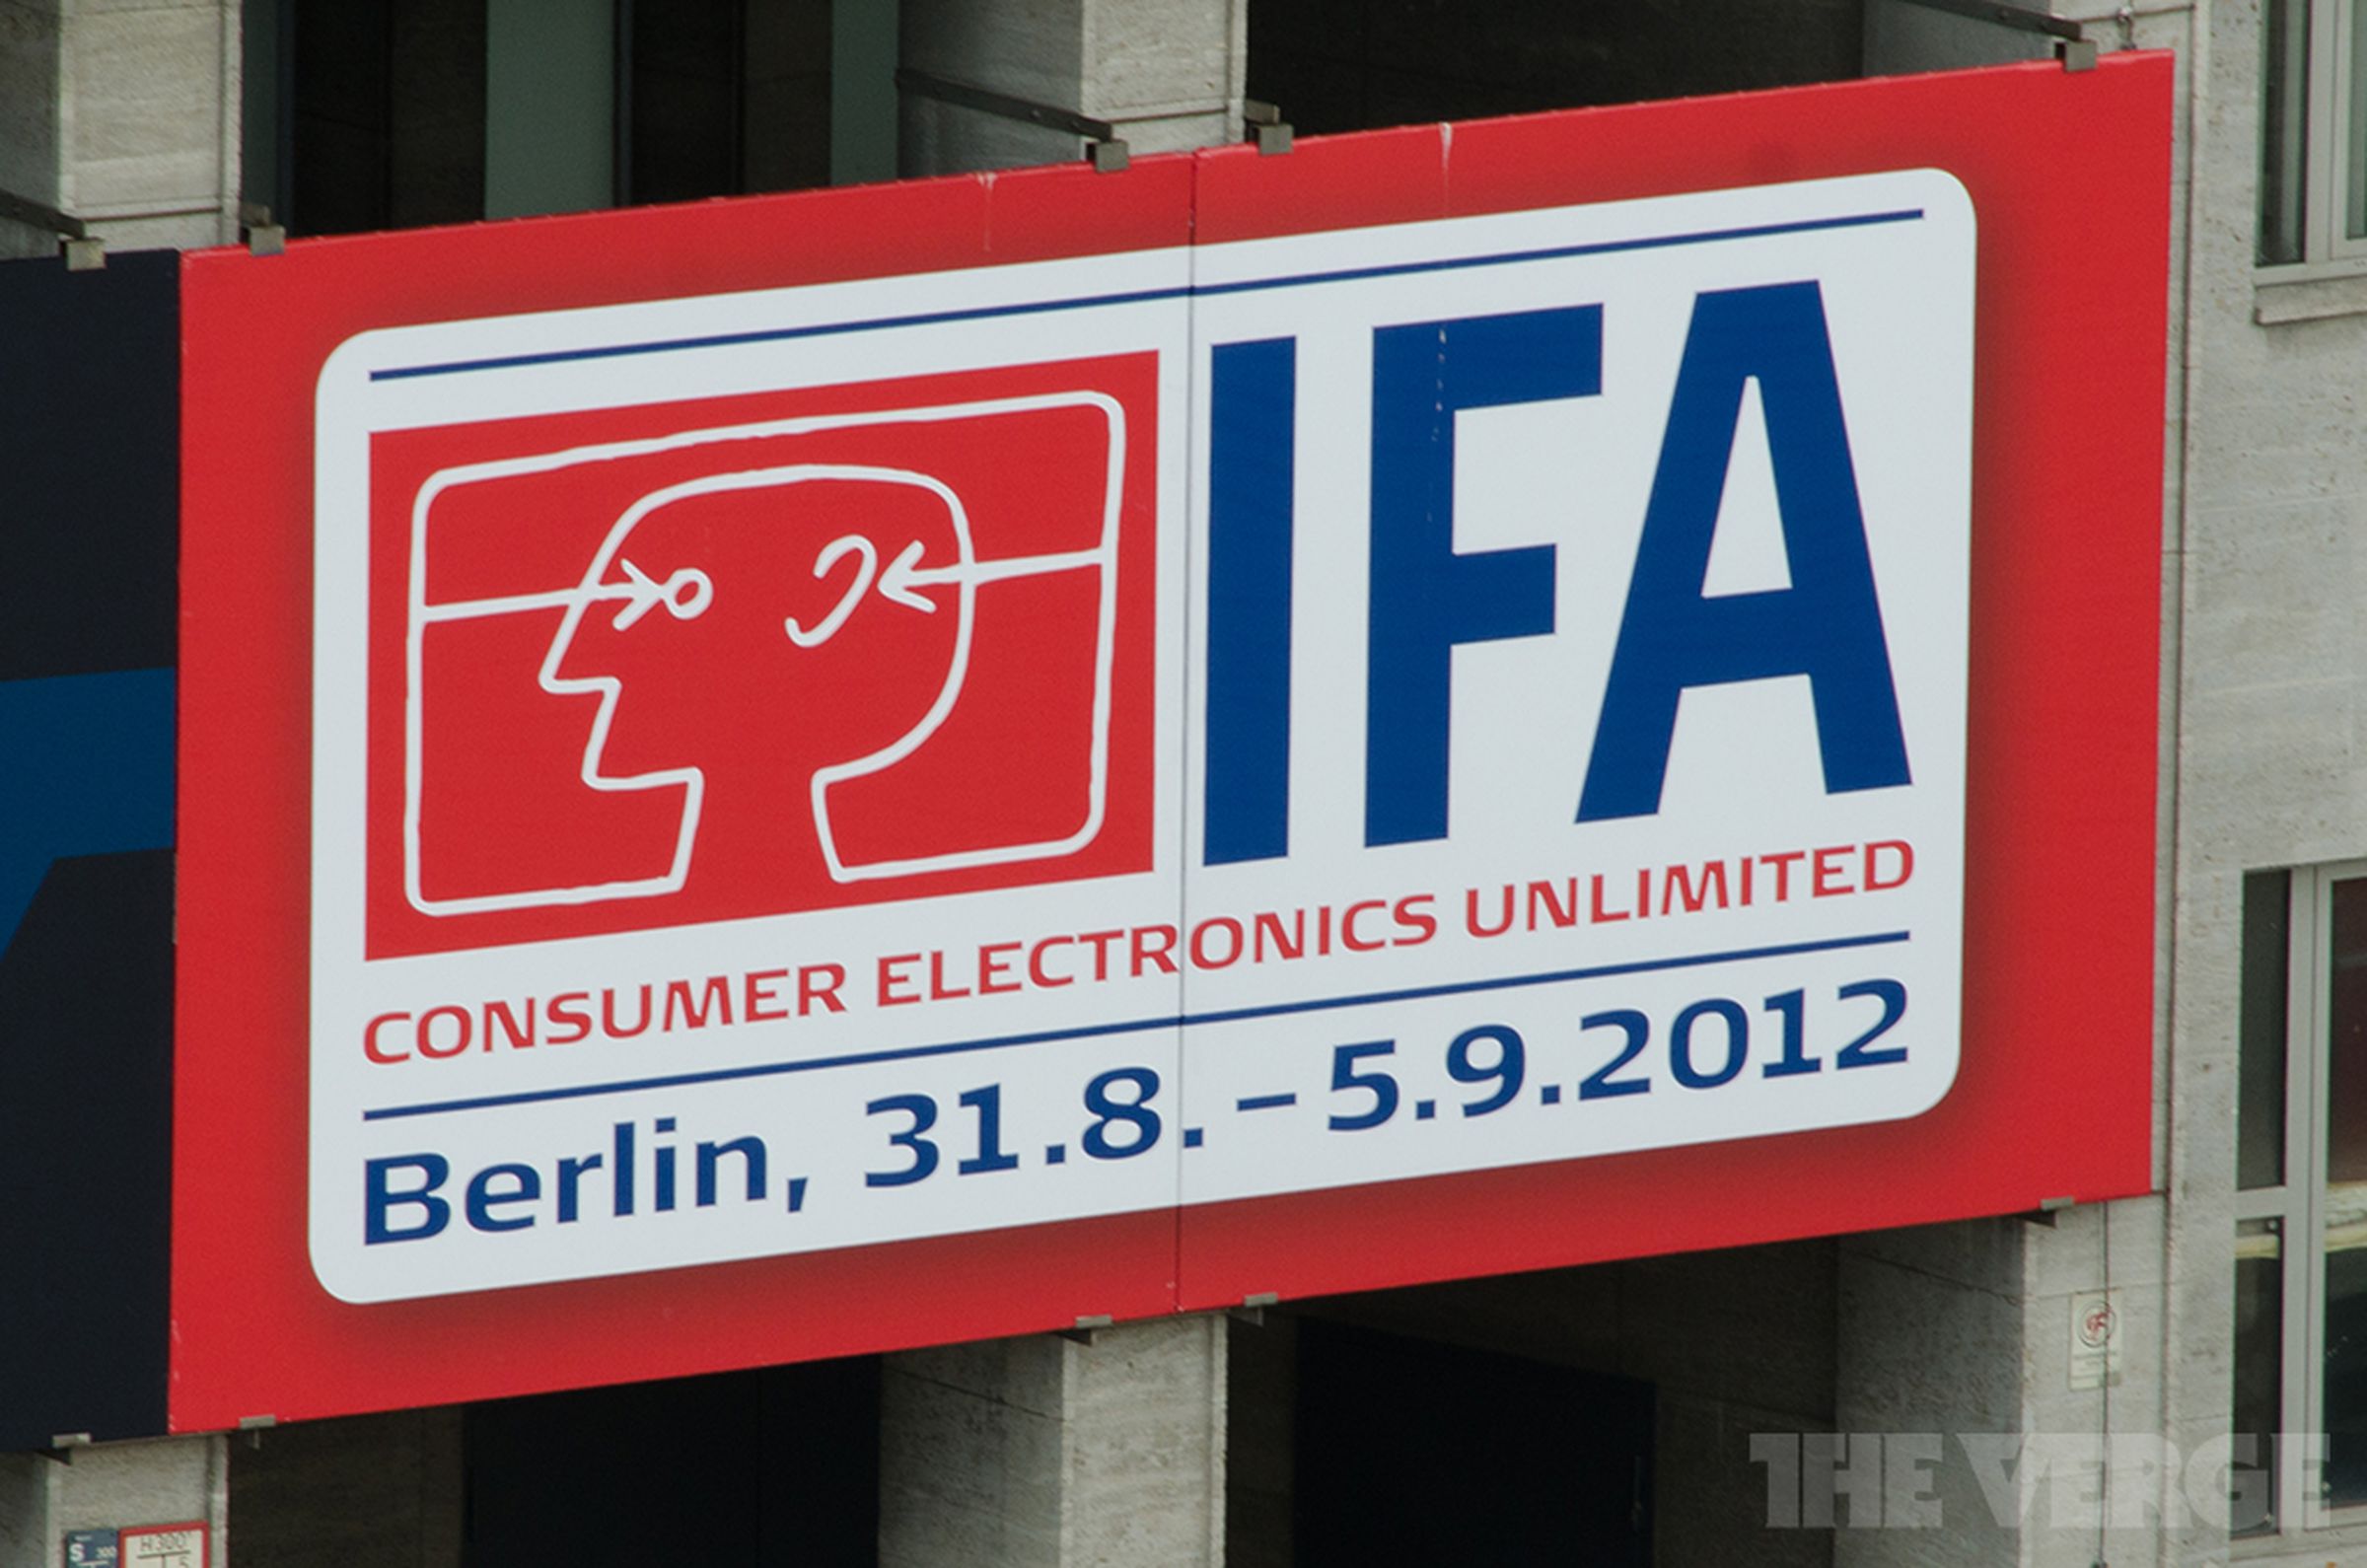 Photos from IFA in Berlin, Germany